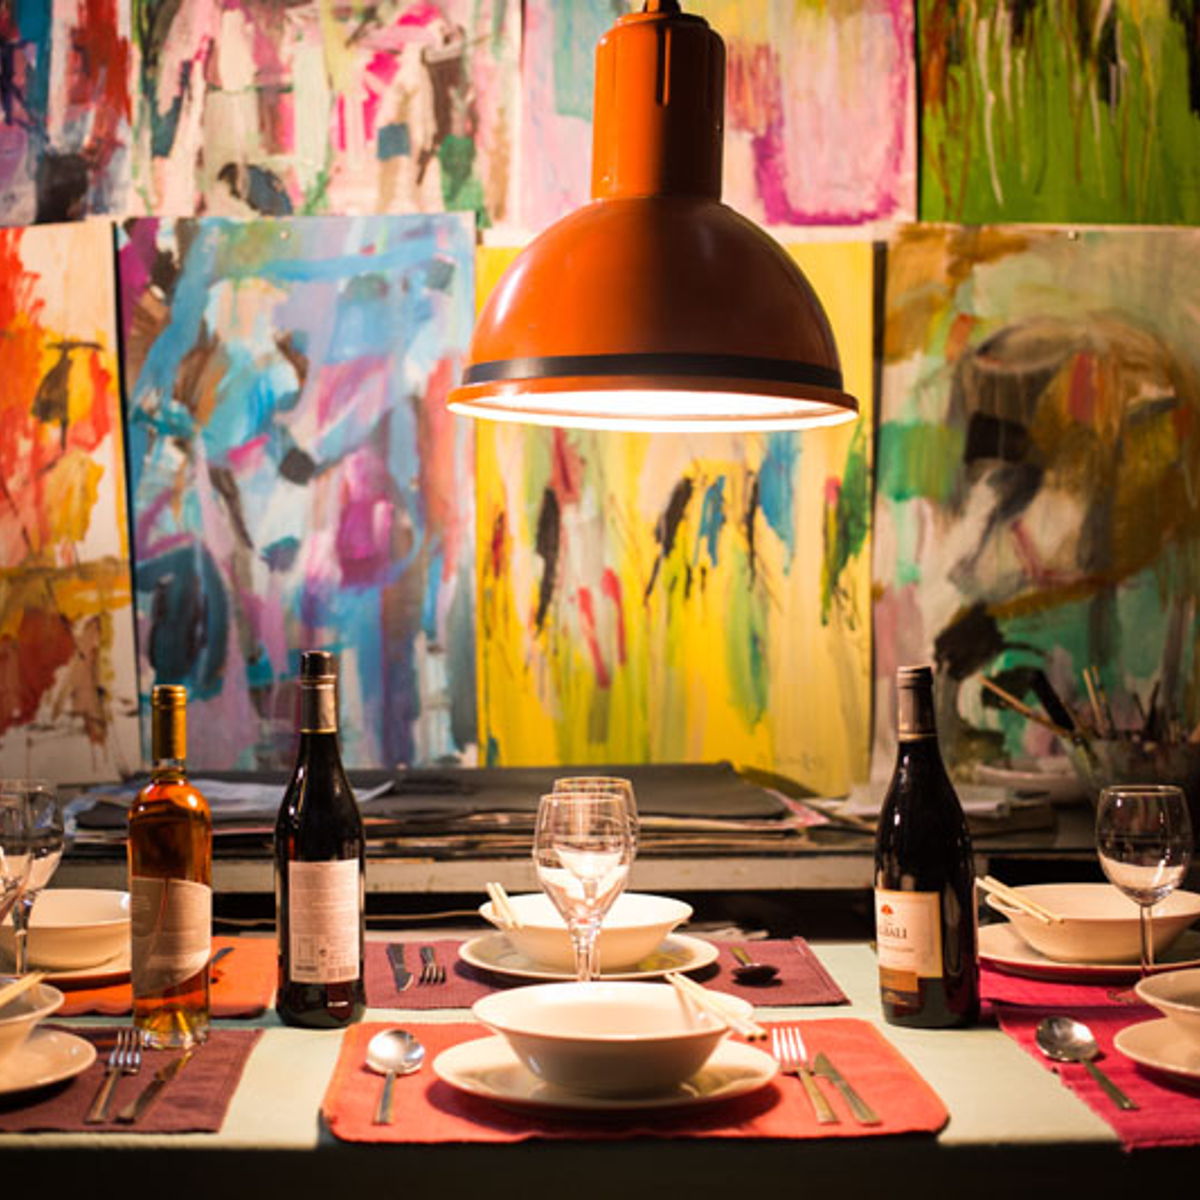 Gastronomic dinner with a chef and artist in his Seville studio